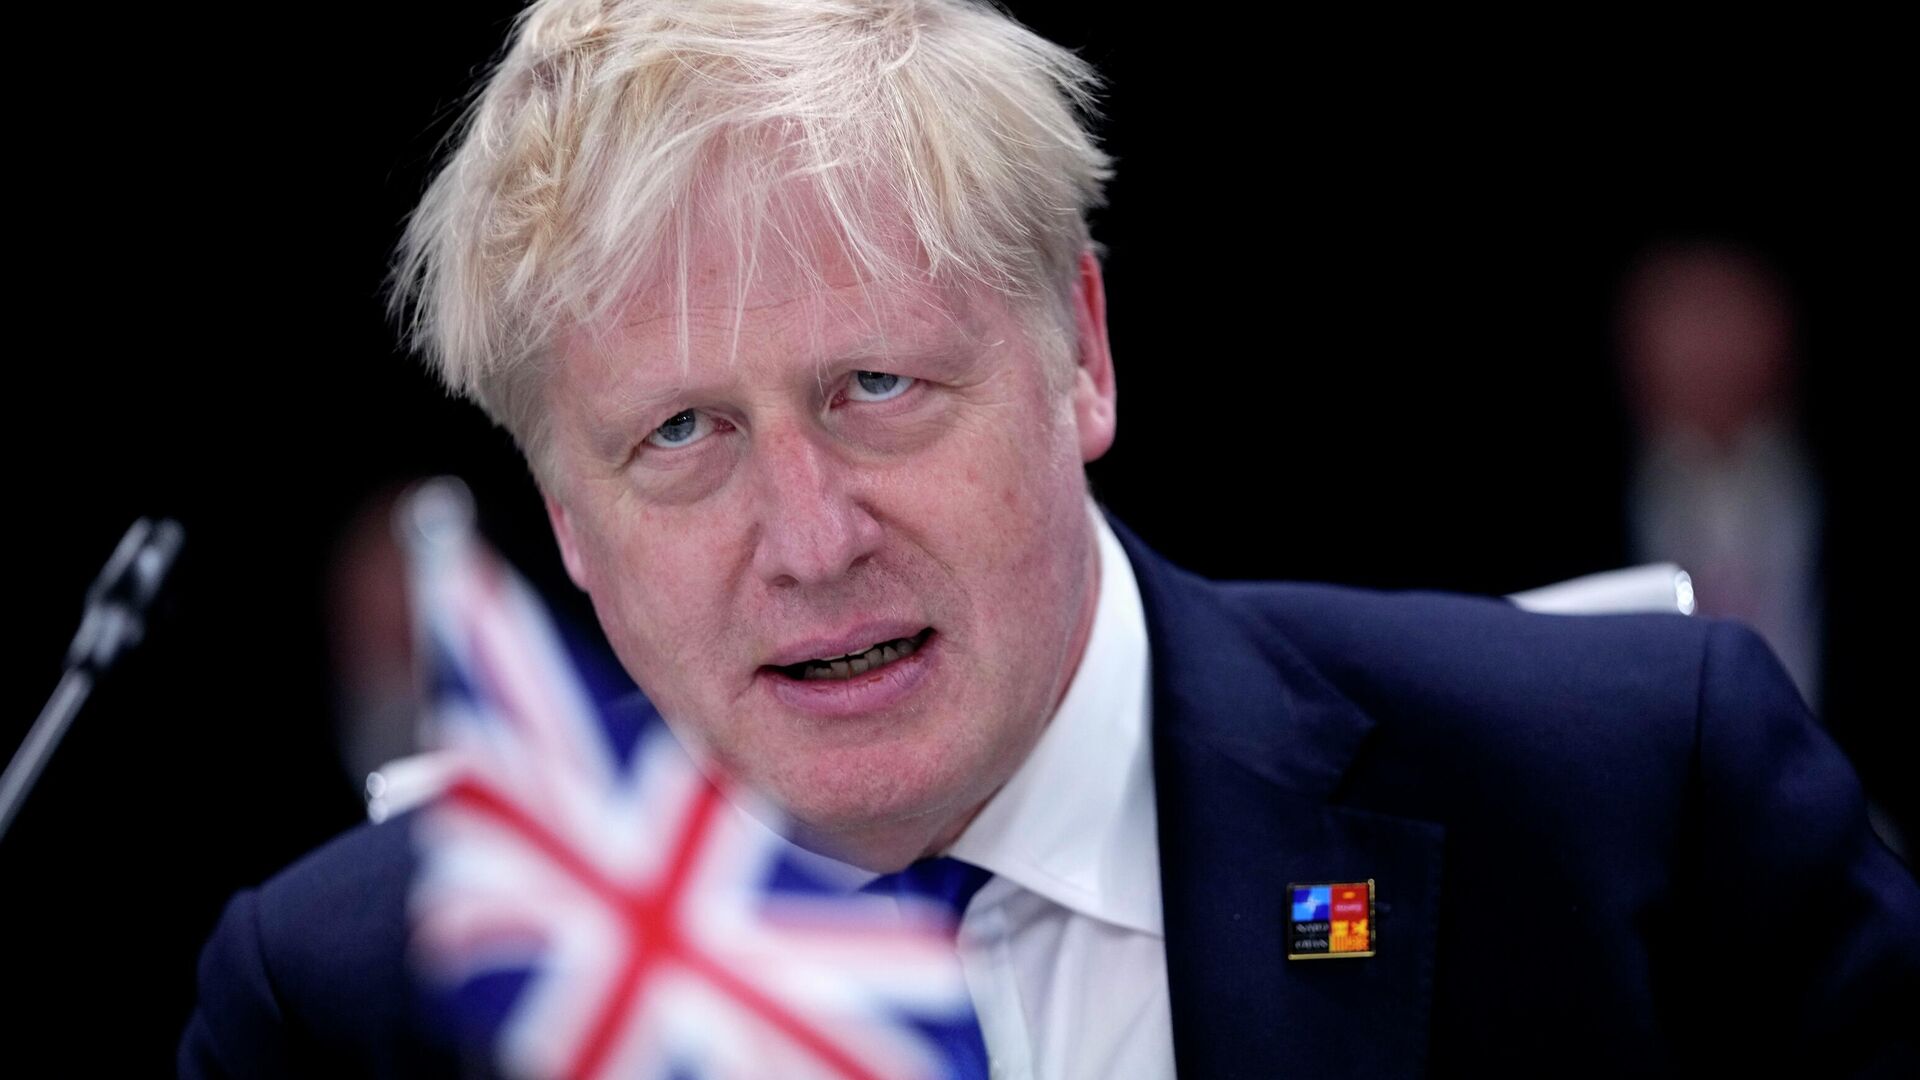 British Prime Minister Boris Johnson waits for the start of a round table meeting at a NATO summit in Madrid, Spain on Wednesday, June 29, 2022 - Sputnik International, 1920, 01.07.2022